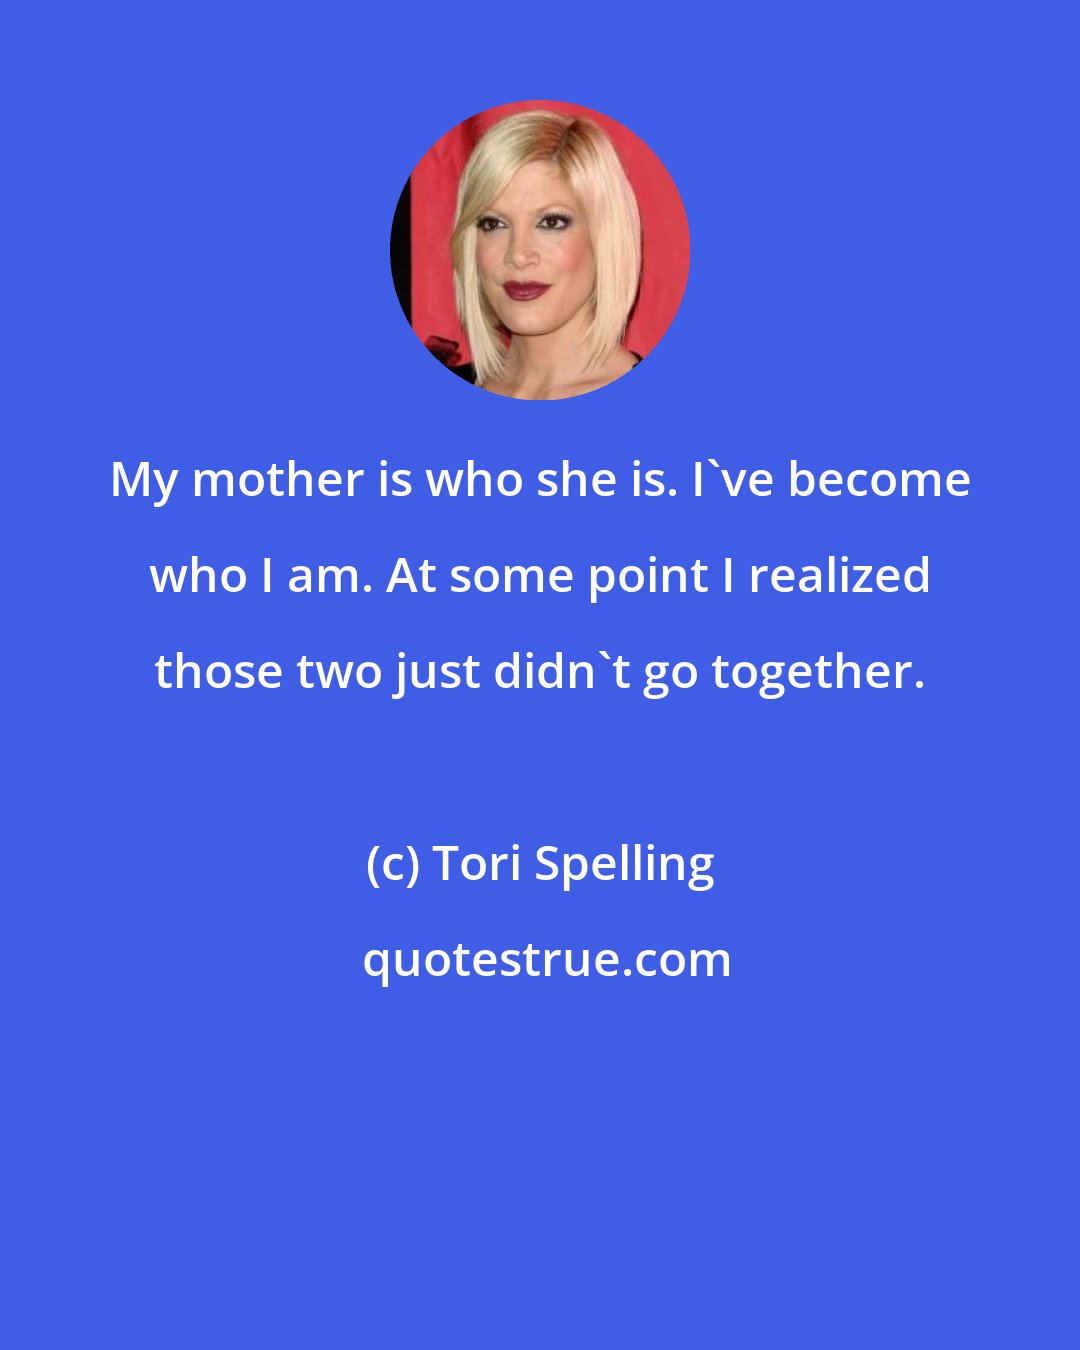 Tori Spelling: My mother is who she is. I've become who I am. At some point I realized those two just didn't go together.